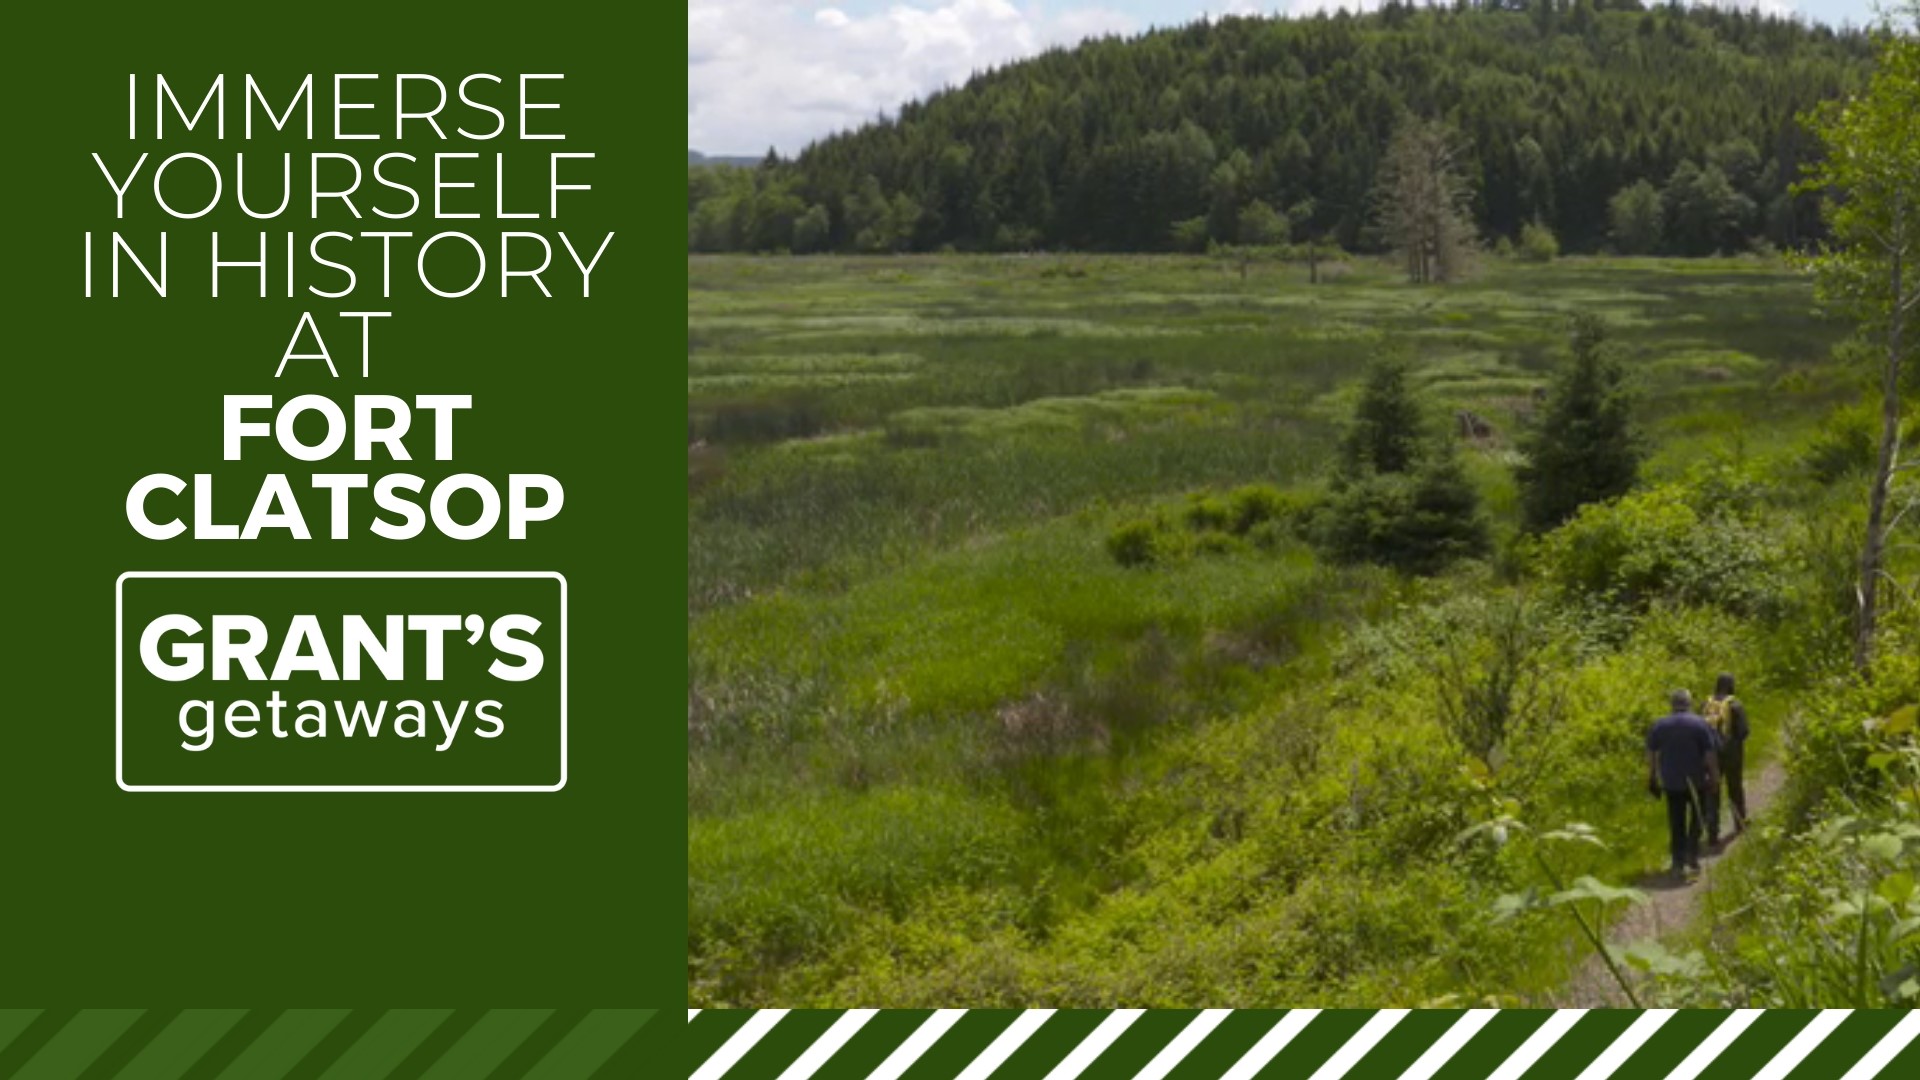 From historical demonstrations to a gorgeous hike to the ocean, there's something at Fort Clatsop for everyone.